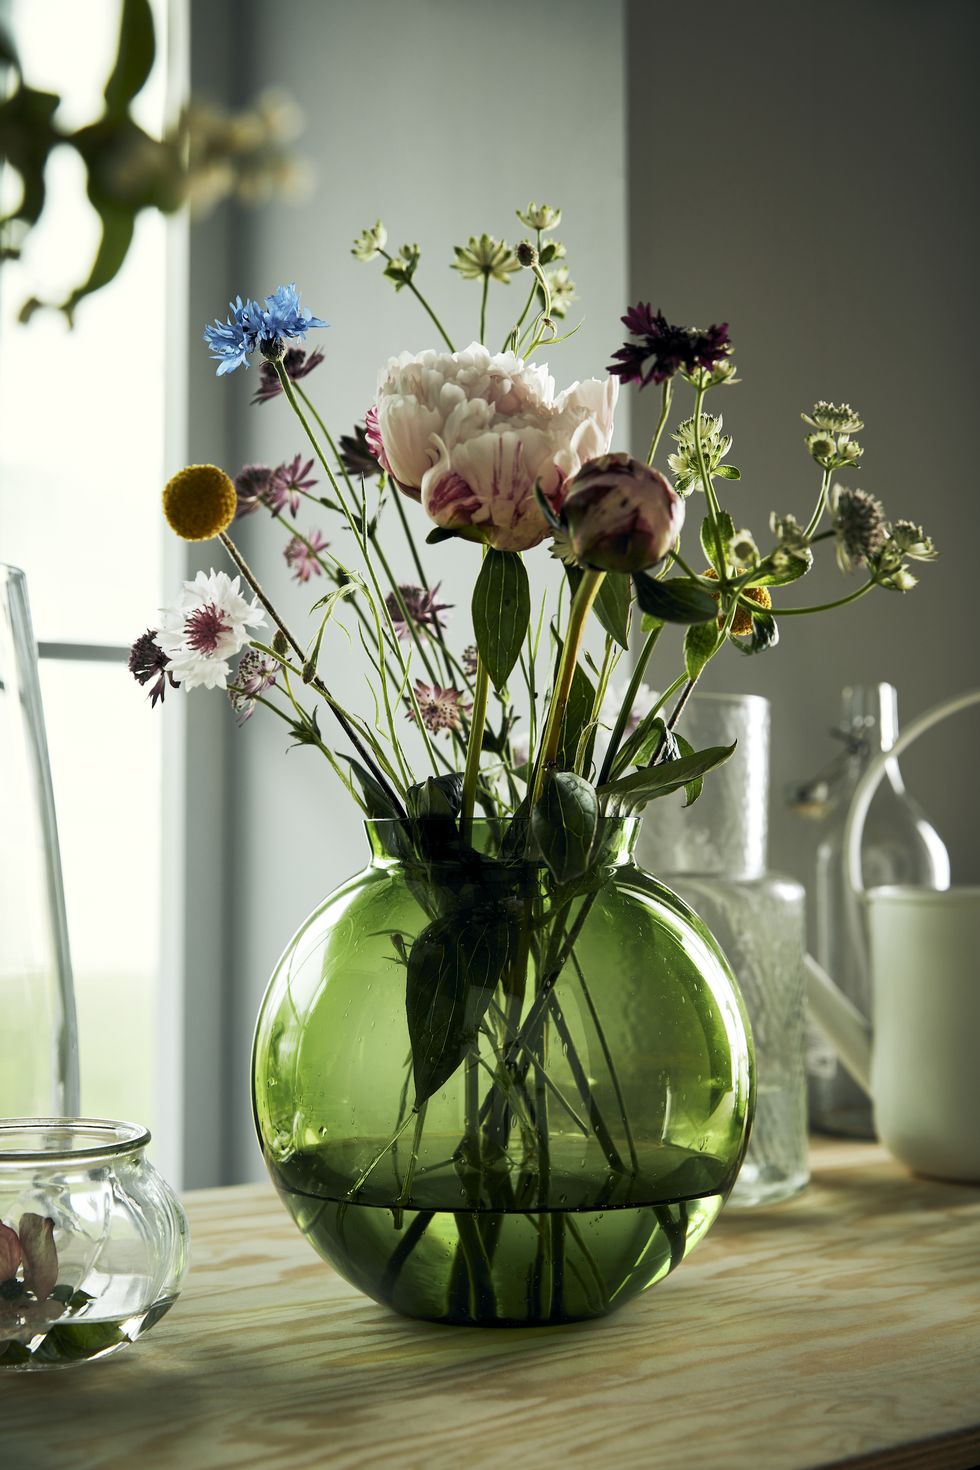 IKEA Launches KONSTFULL Vases Designed by Ilse Crawford